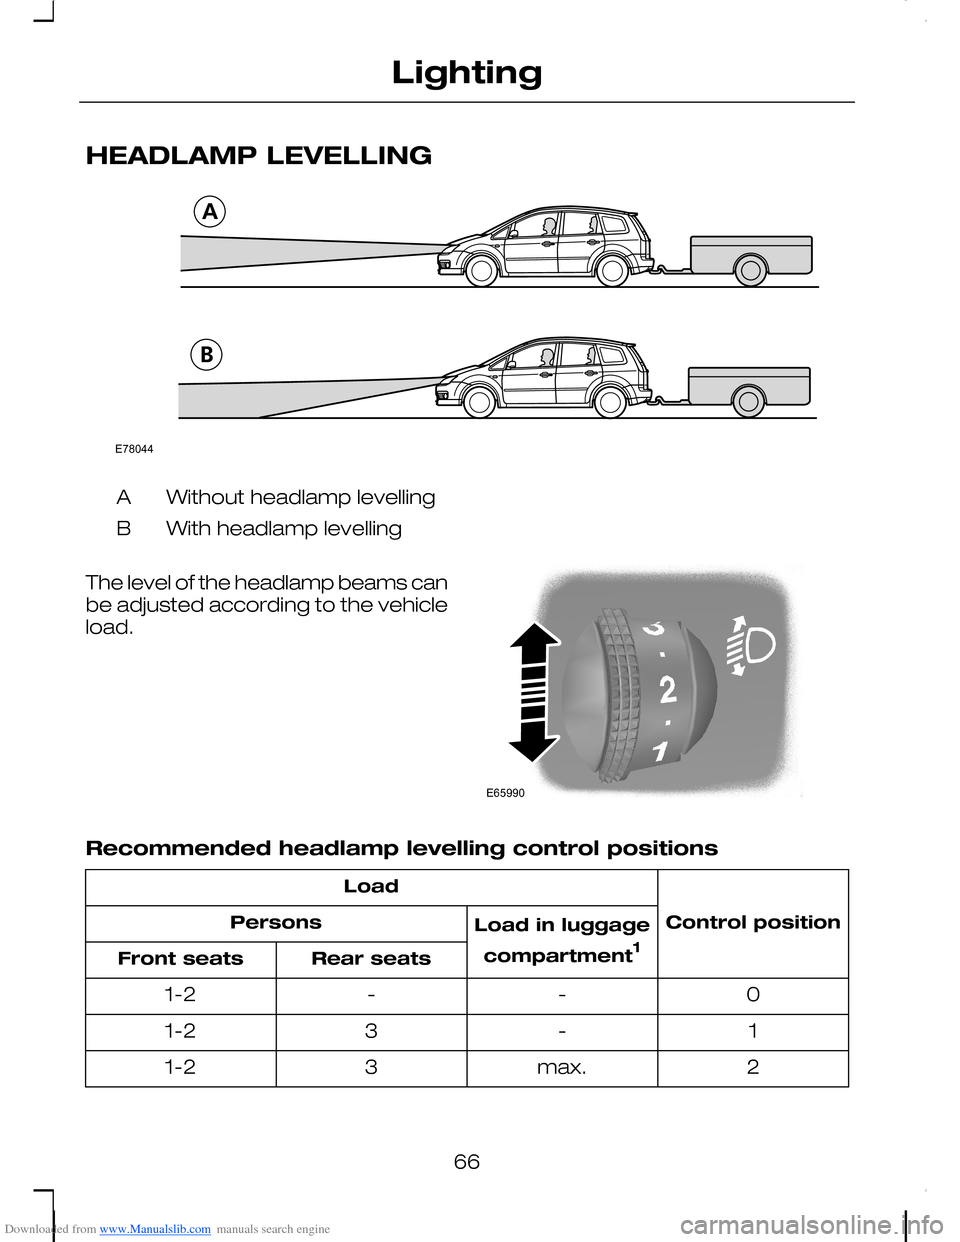 FORD C MAX 2008 1.G User Guide Downloaded from www.Manualslib.com manuals search engine HEADLAMP LEVELLING
Without headlamp levellingA
With headlamp levellingB
The level of the headlamp beams canbe adjusted according to the vehicle